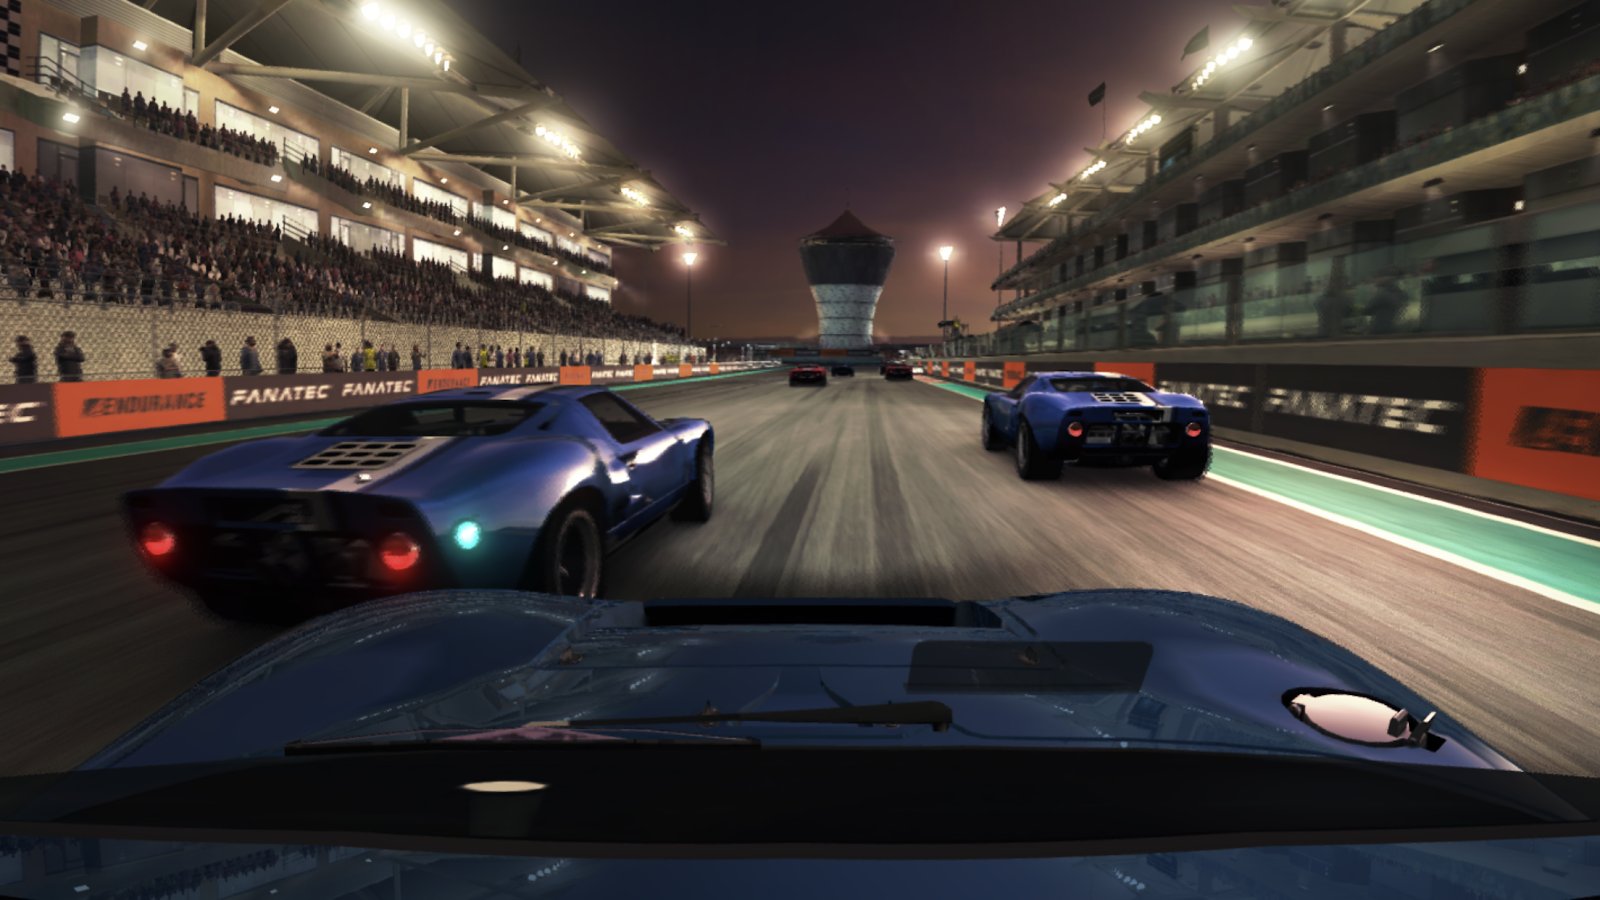 grid autosport android requirements